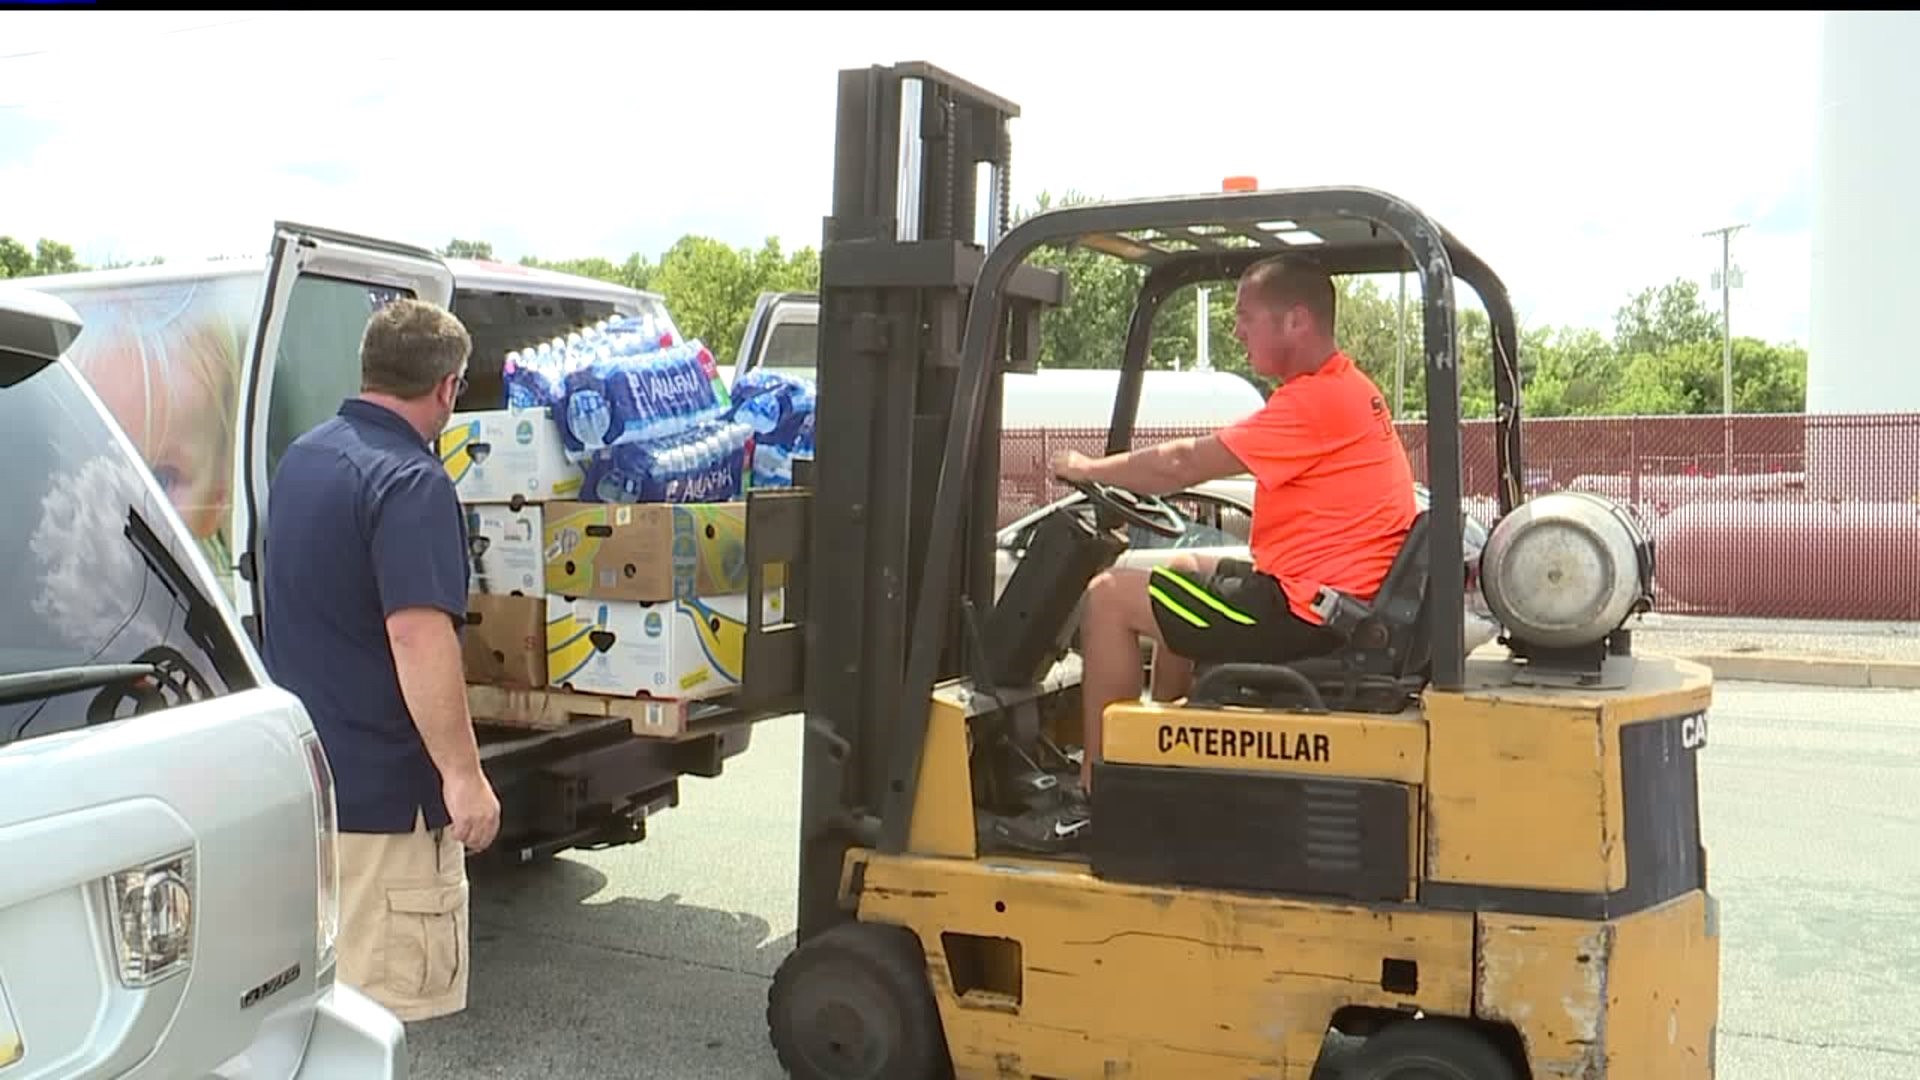 The York County Food Bank is hosting a food drive today to help people affected by Hurricane Harvey in Texas